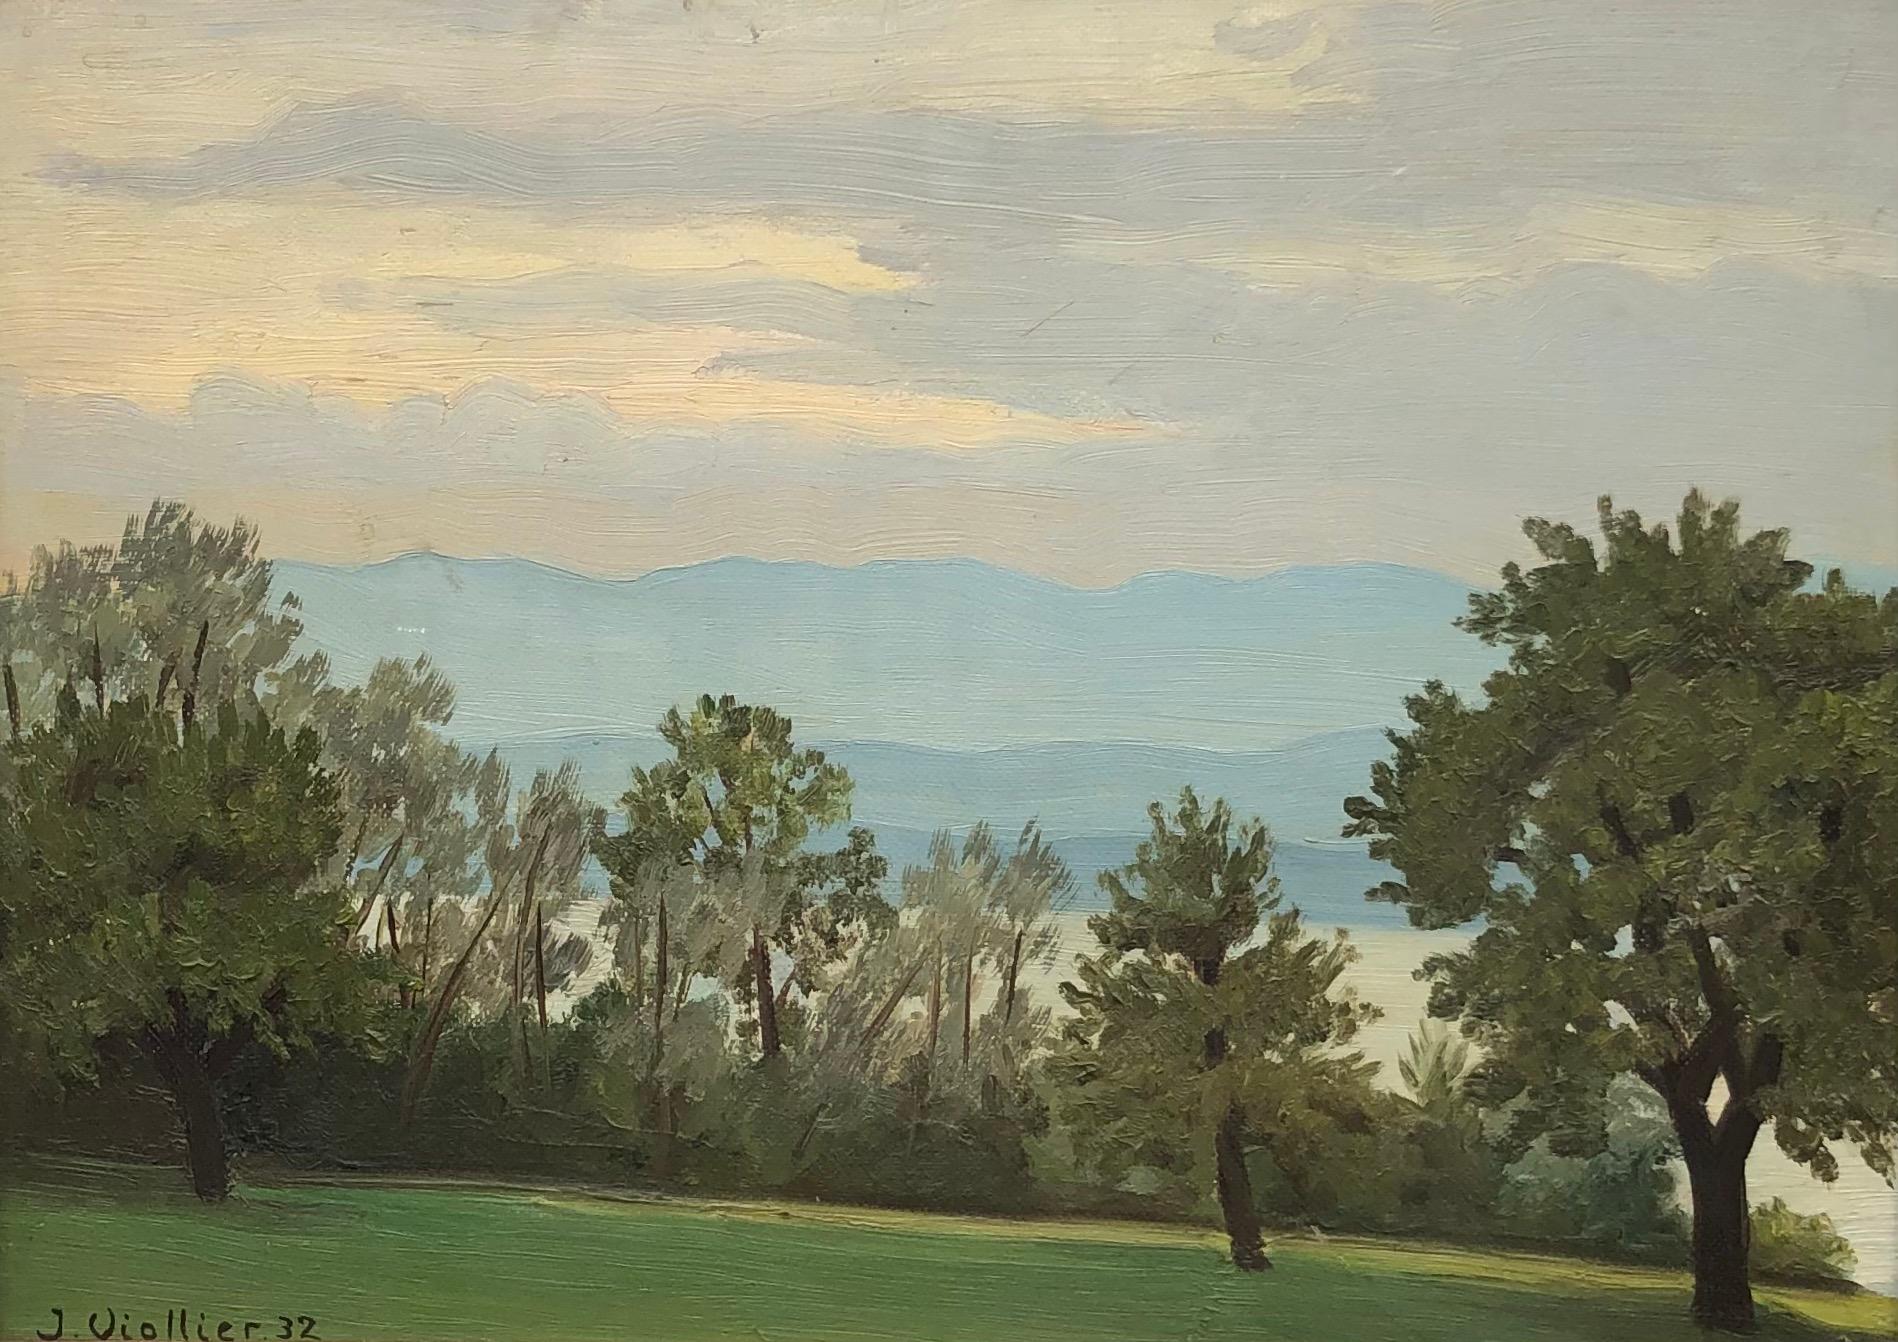 Jean Viollier Landscape Painting - From Cologny with a view of the Jura